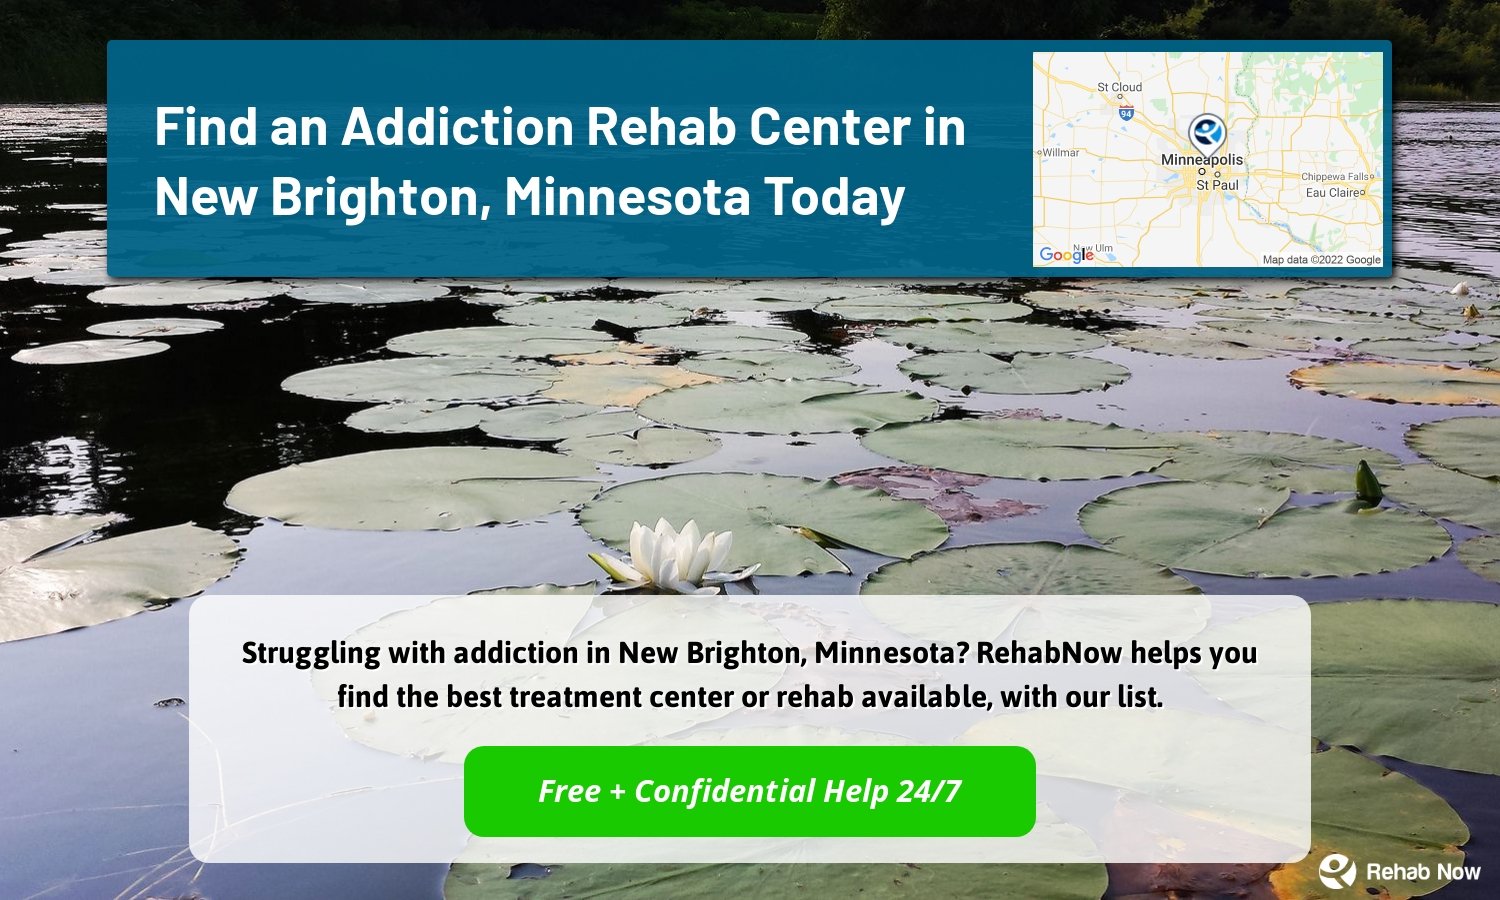 Struggling with addiction in New Brighton, Minnesota? RehabNow helps you find the best treatment center or rehab available, with our list.